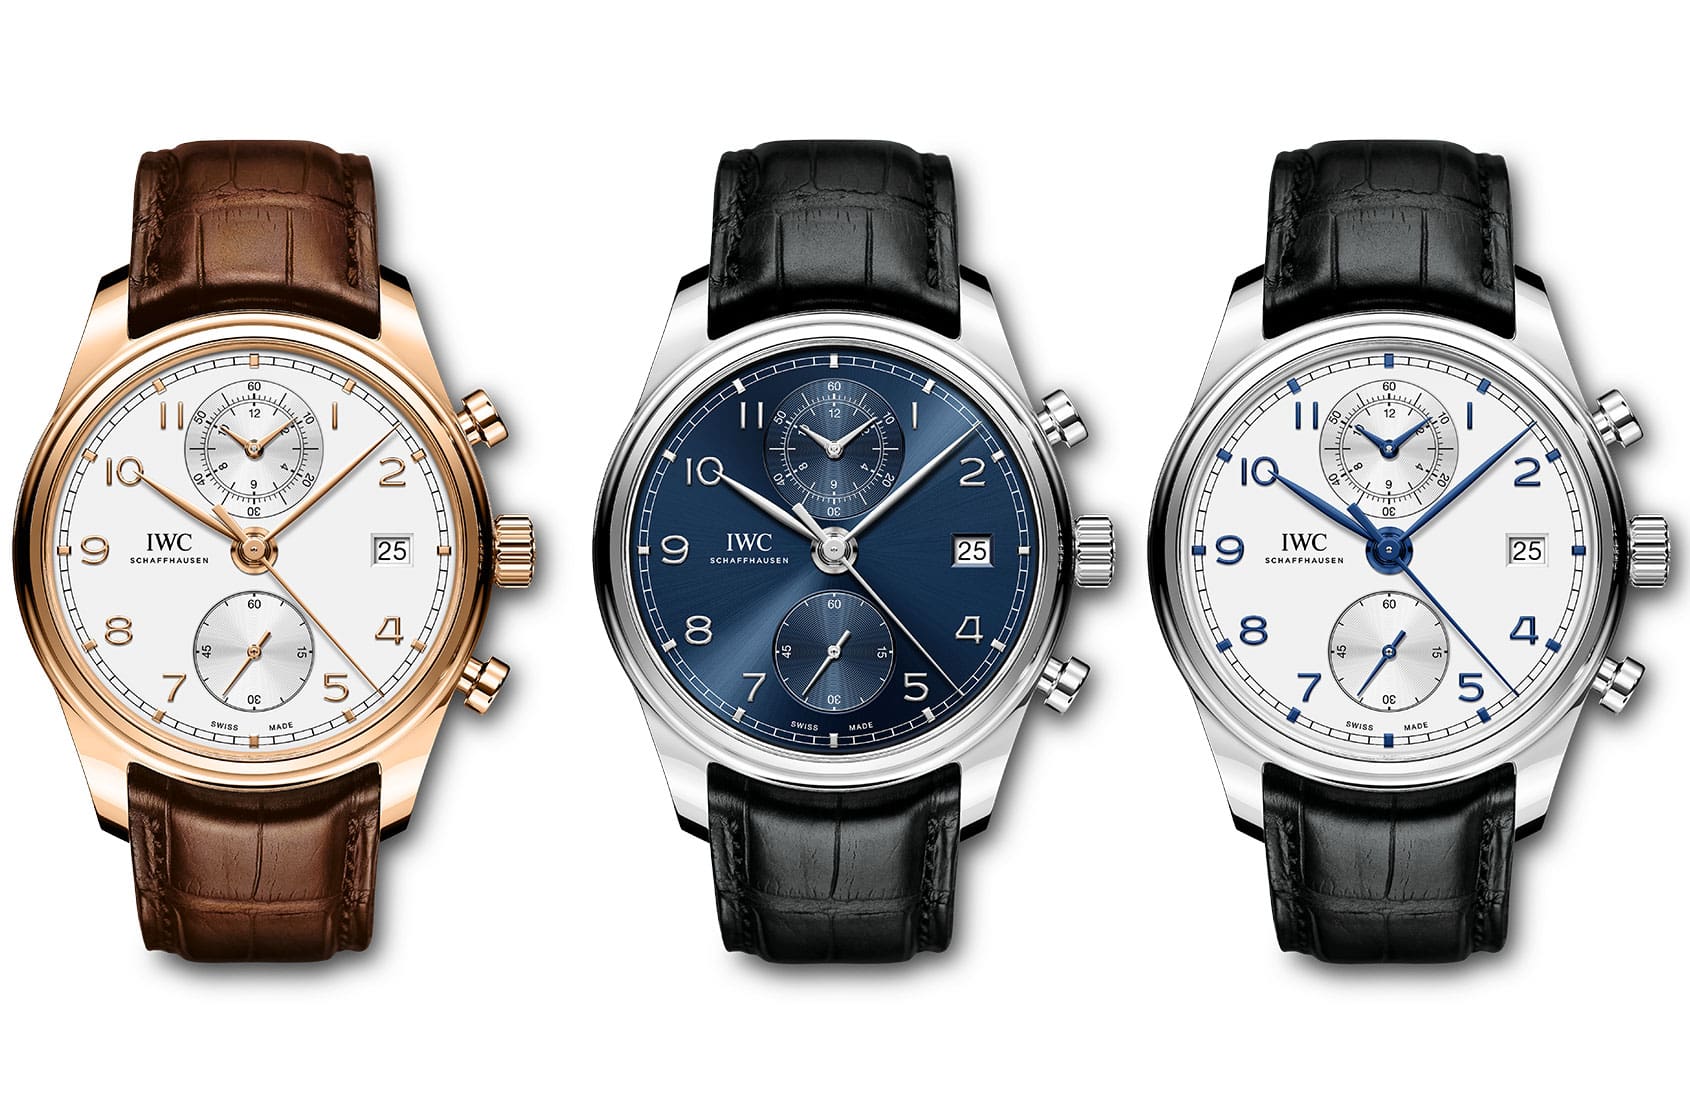 INTRODUCING: The IWC Portugieser Chronograph Classic lives up to its name